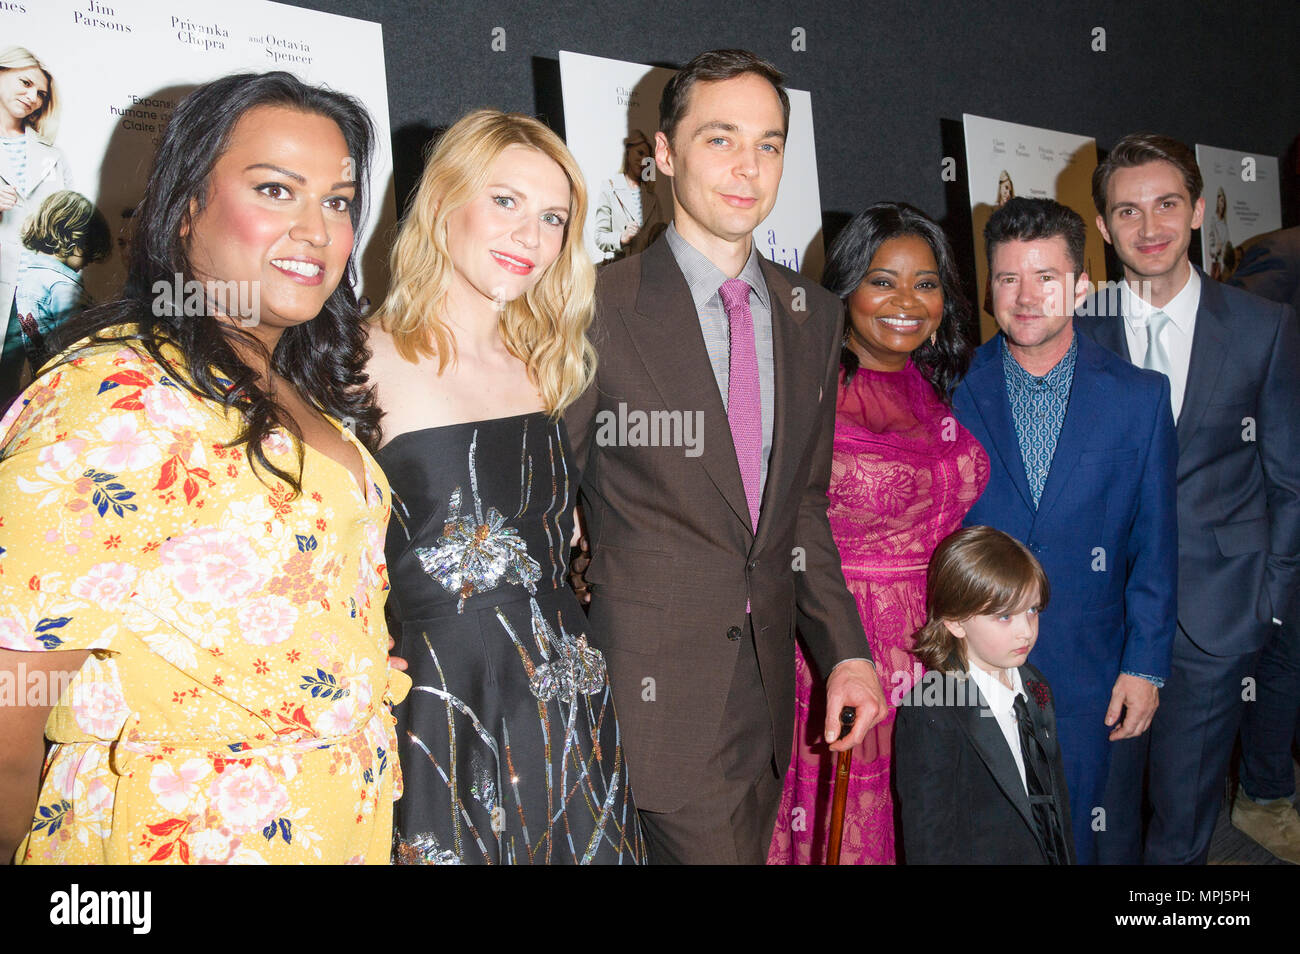 Aneesh Sheth, Claire Danes, Jim Parsons, Leo James Davis, Octavia Spencer, Silas Howard, Daniel Pearle attend A Kid Like Jake premiere at The Landmark at 57 West (Photo by Lev Radin/Pacific Press) Stock Photo